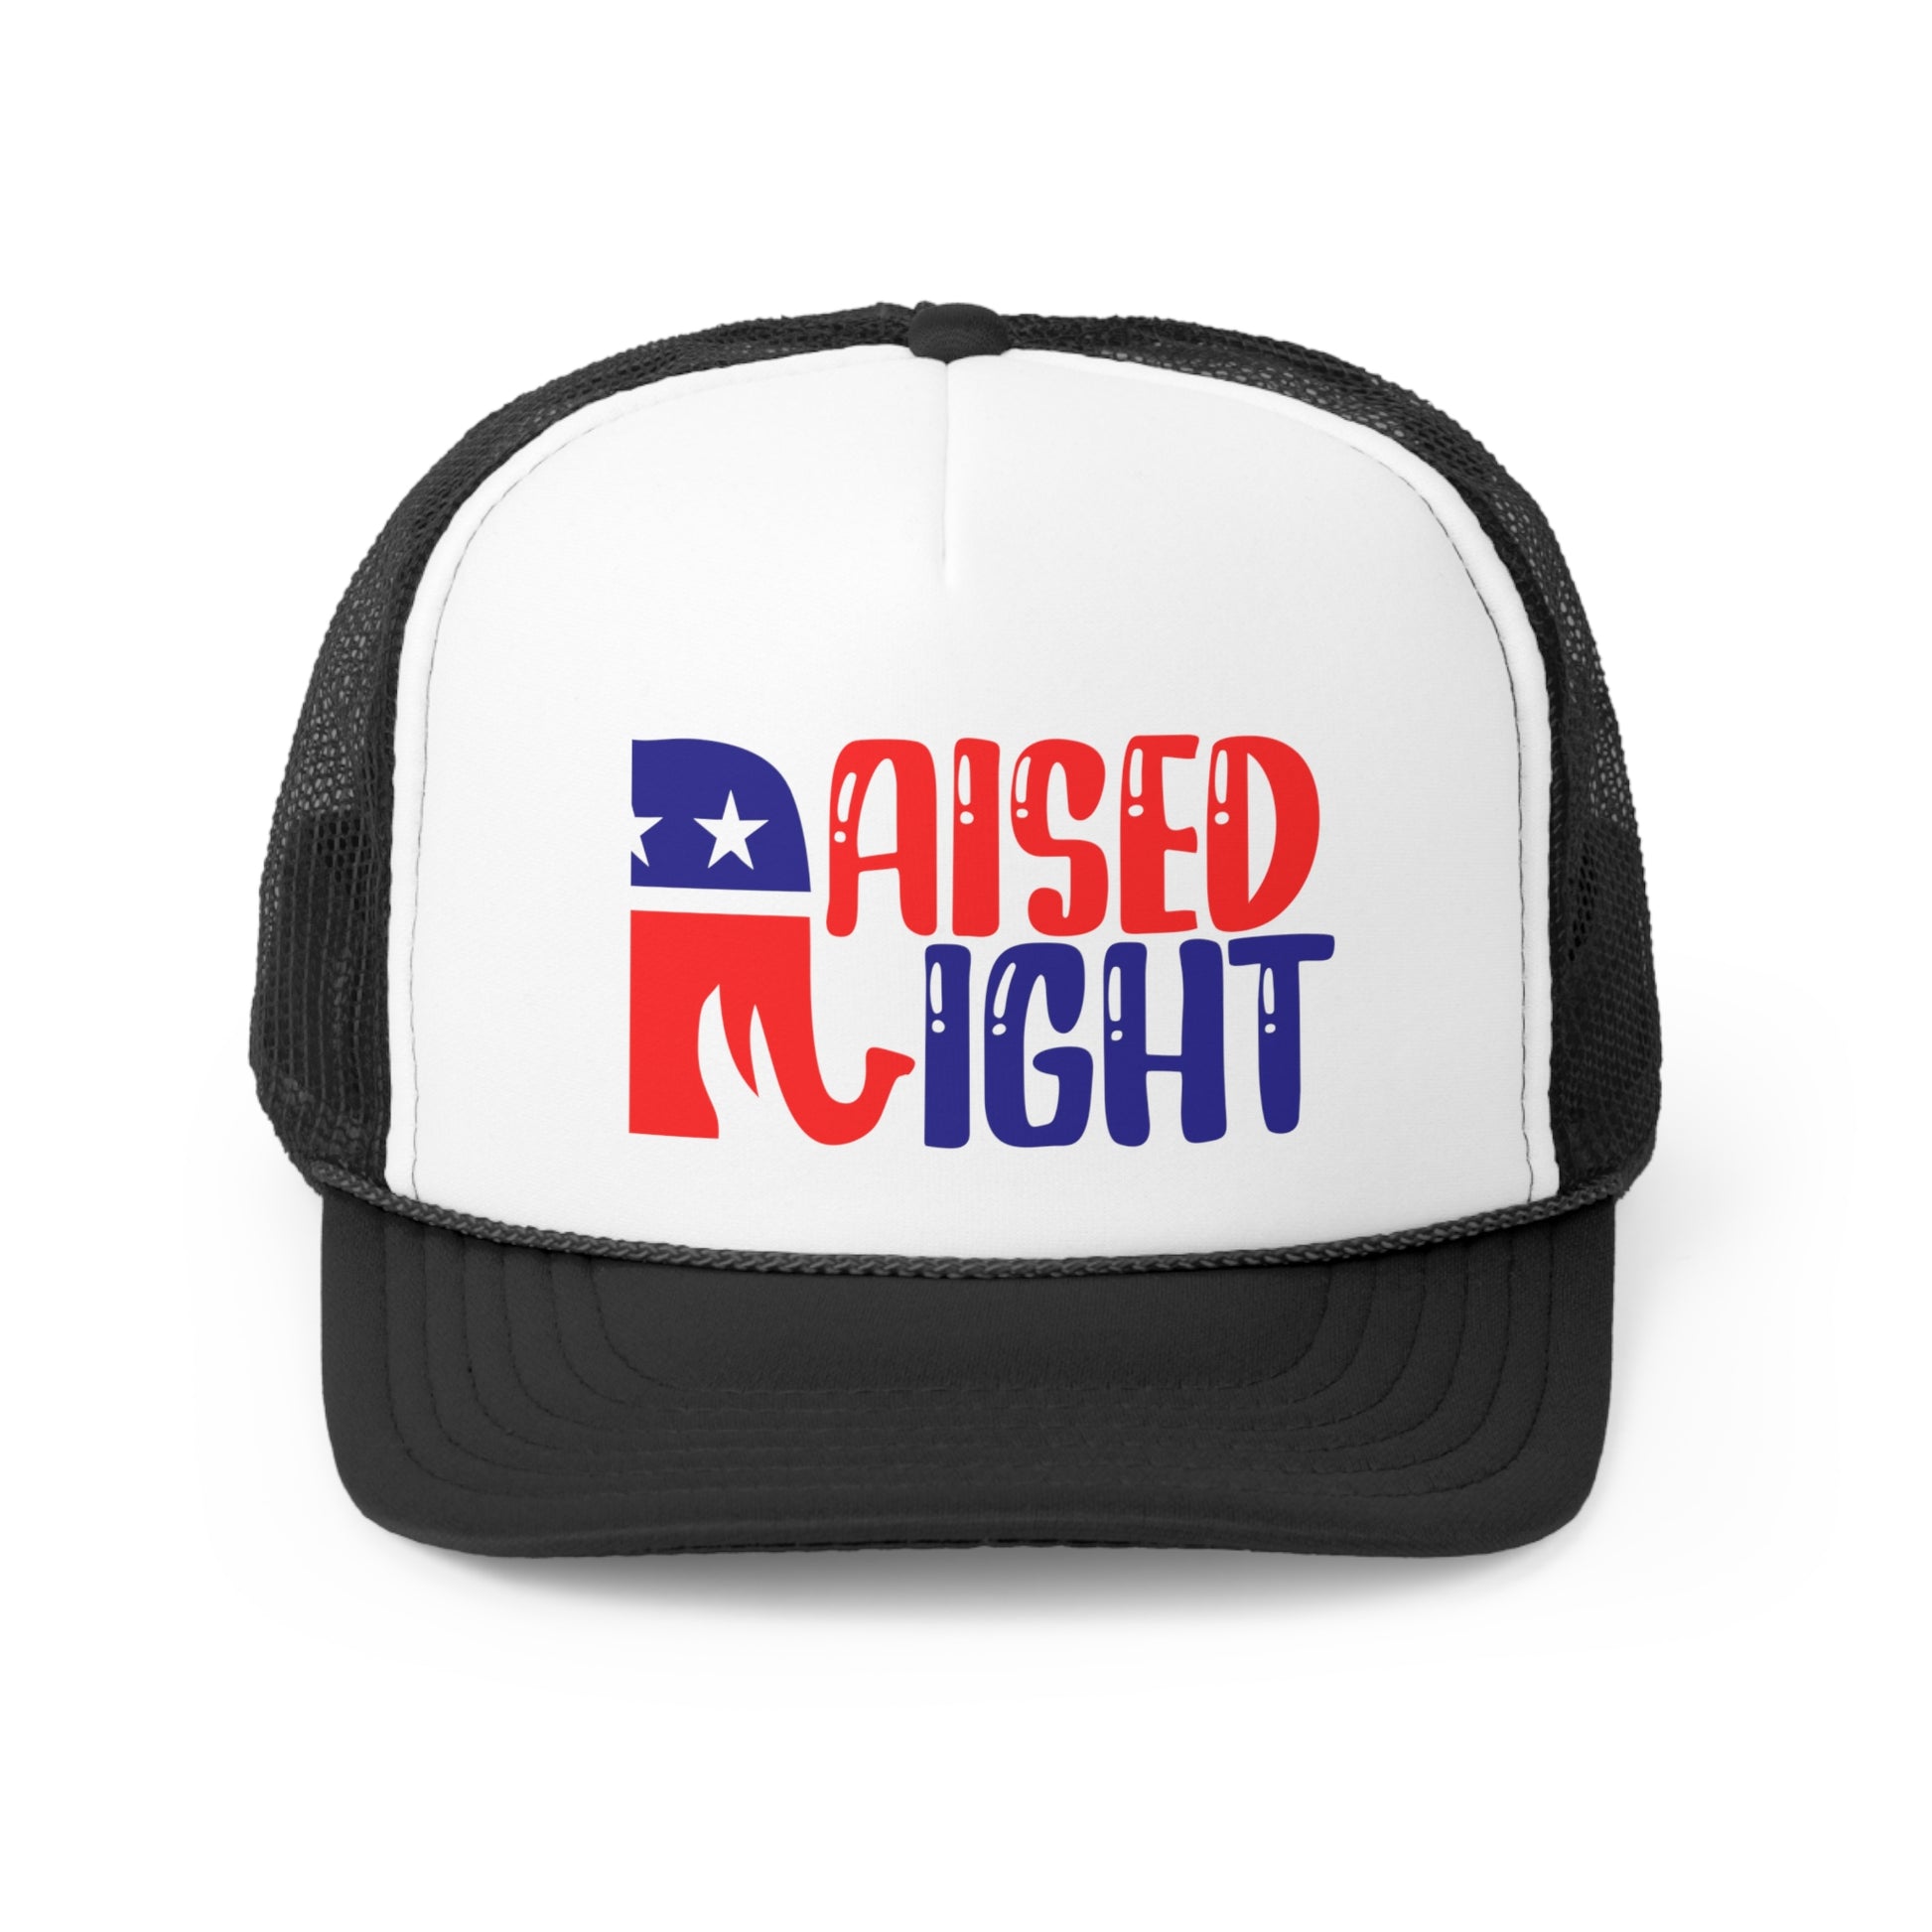 "Raised Right" Hat - Weave Got Gifts - Unique Gifts You Won’t Find Anywhere Else!